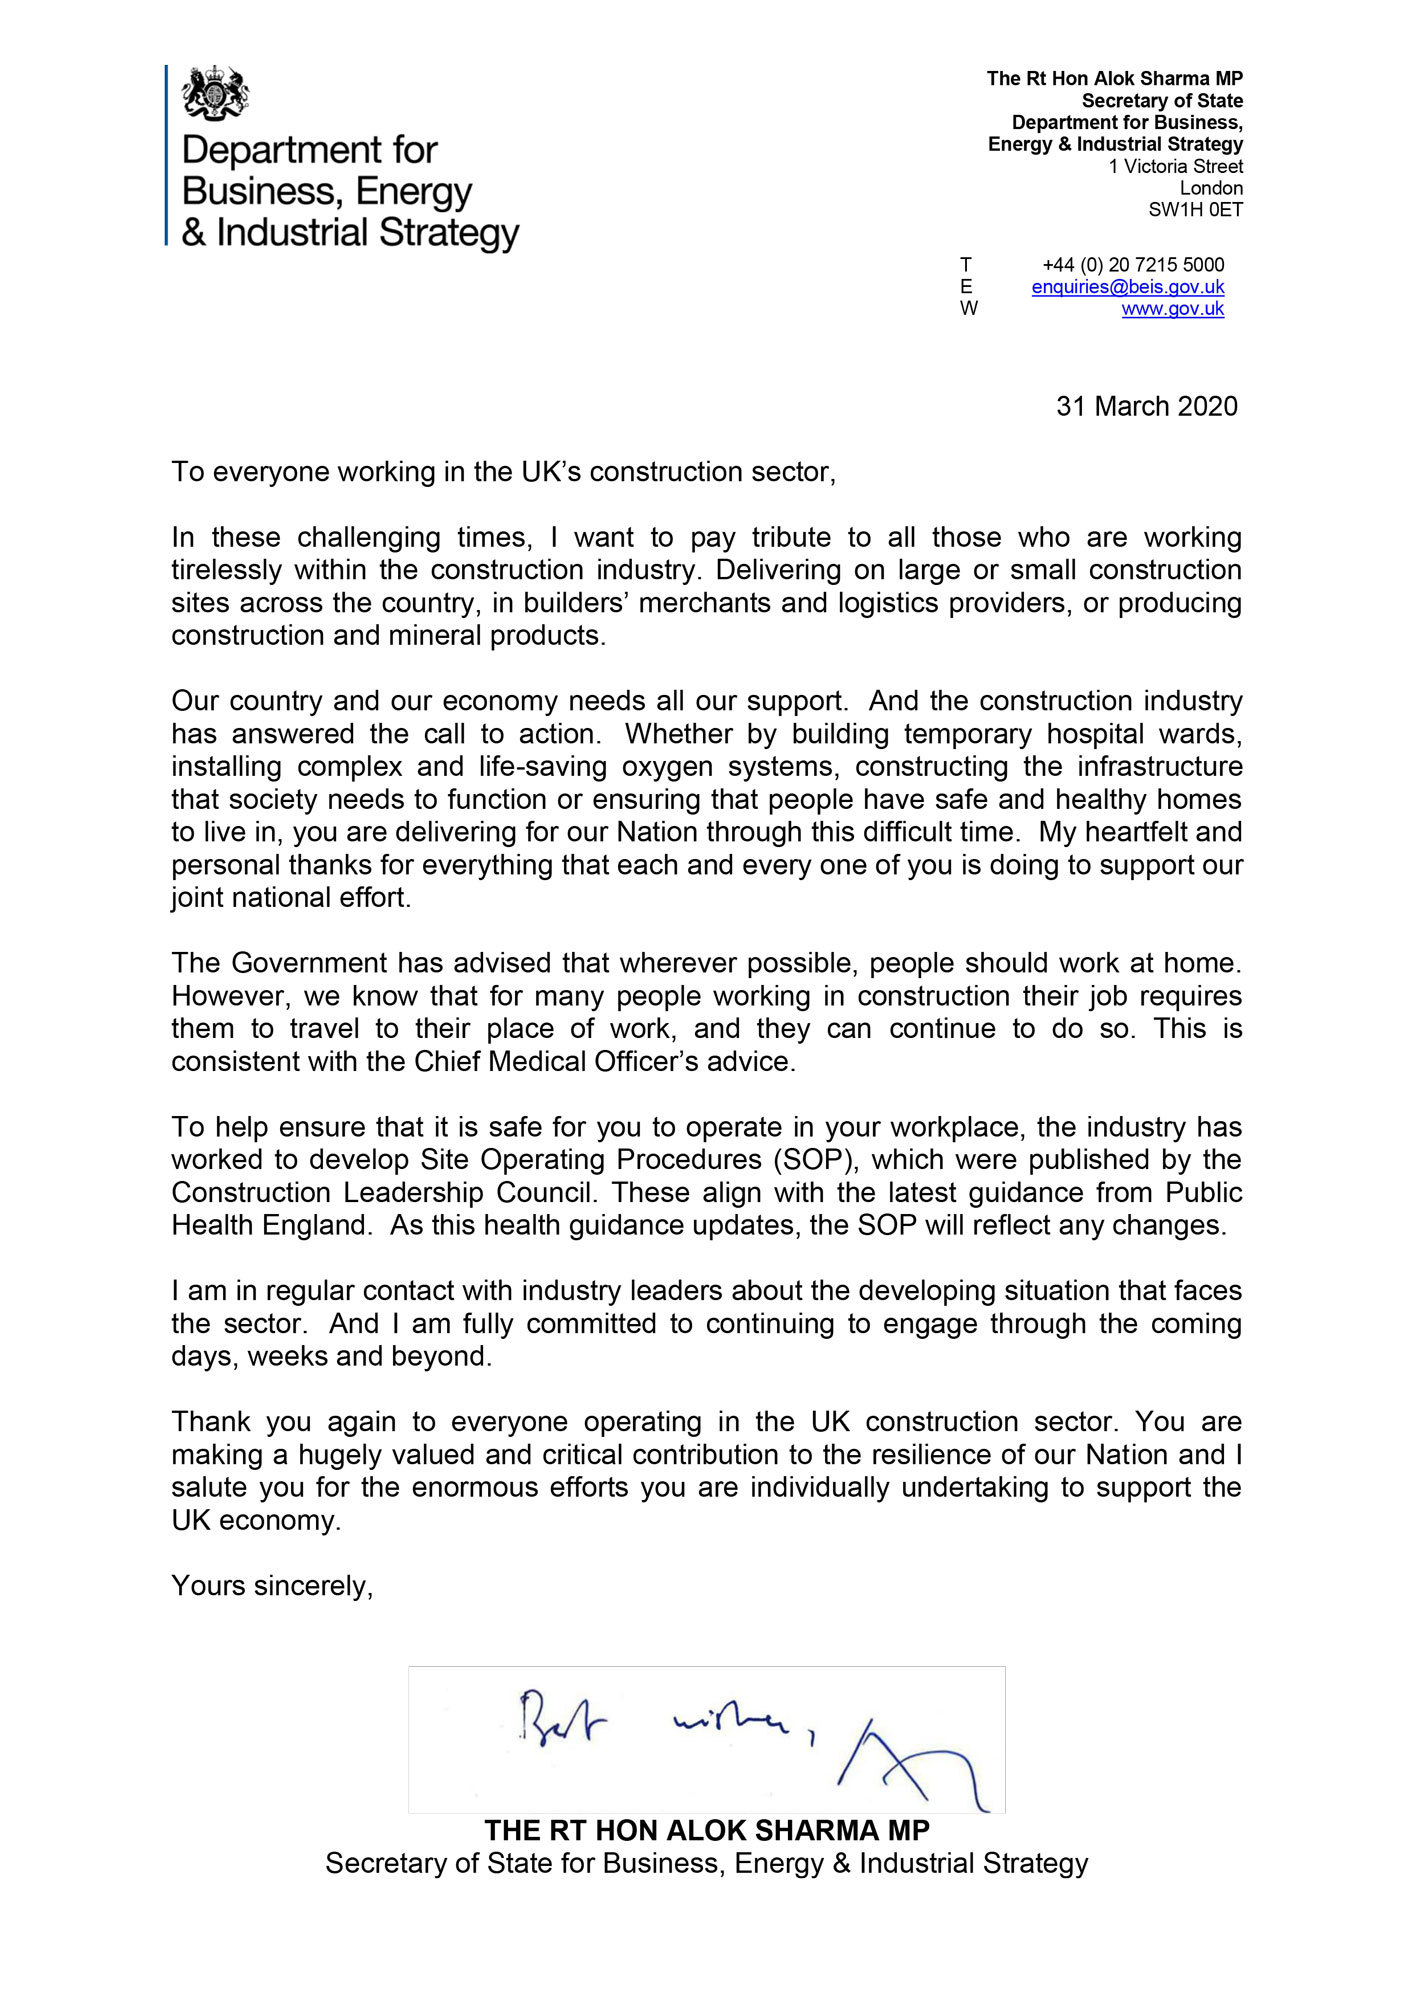 Secretary Of State Letter To Uk Construction Industry